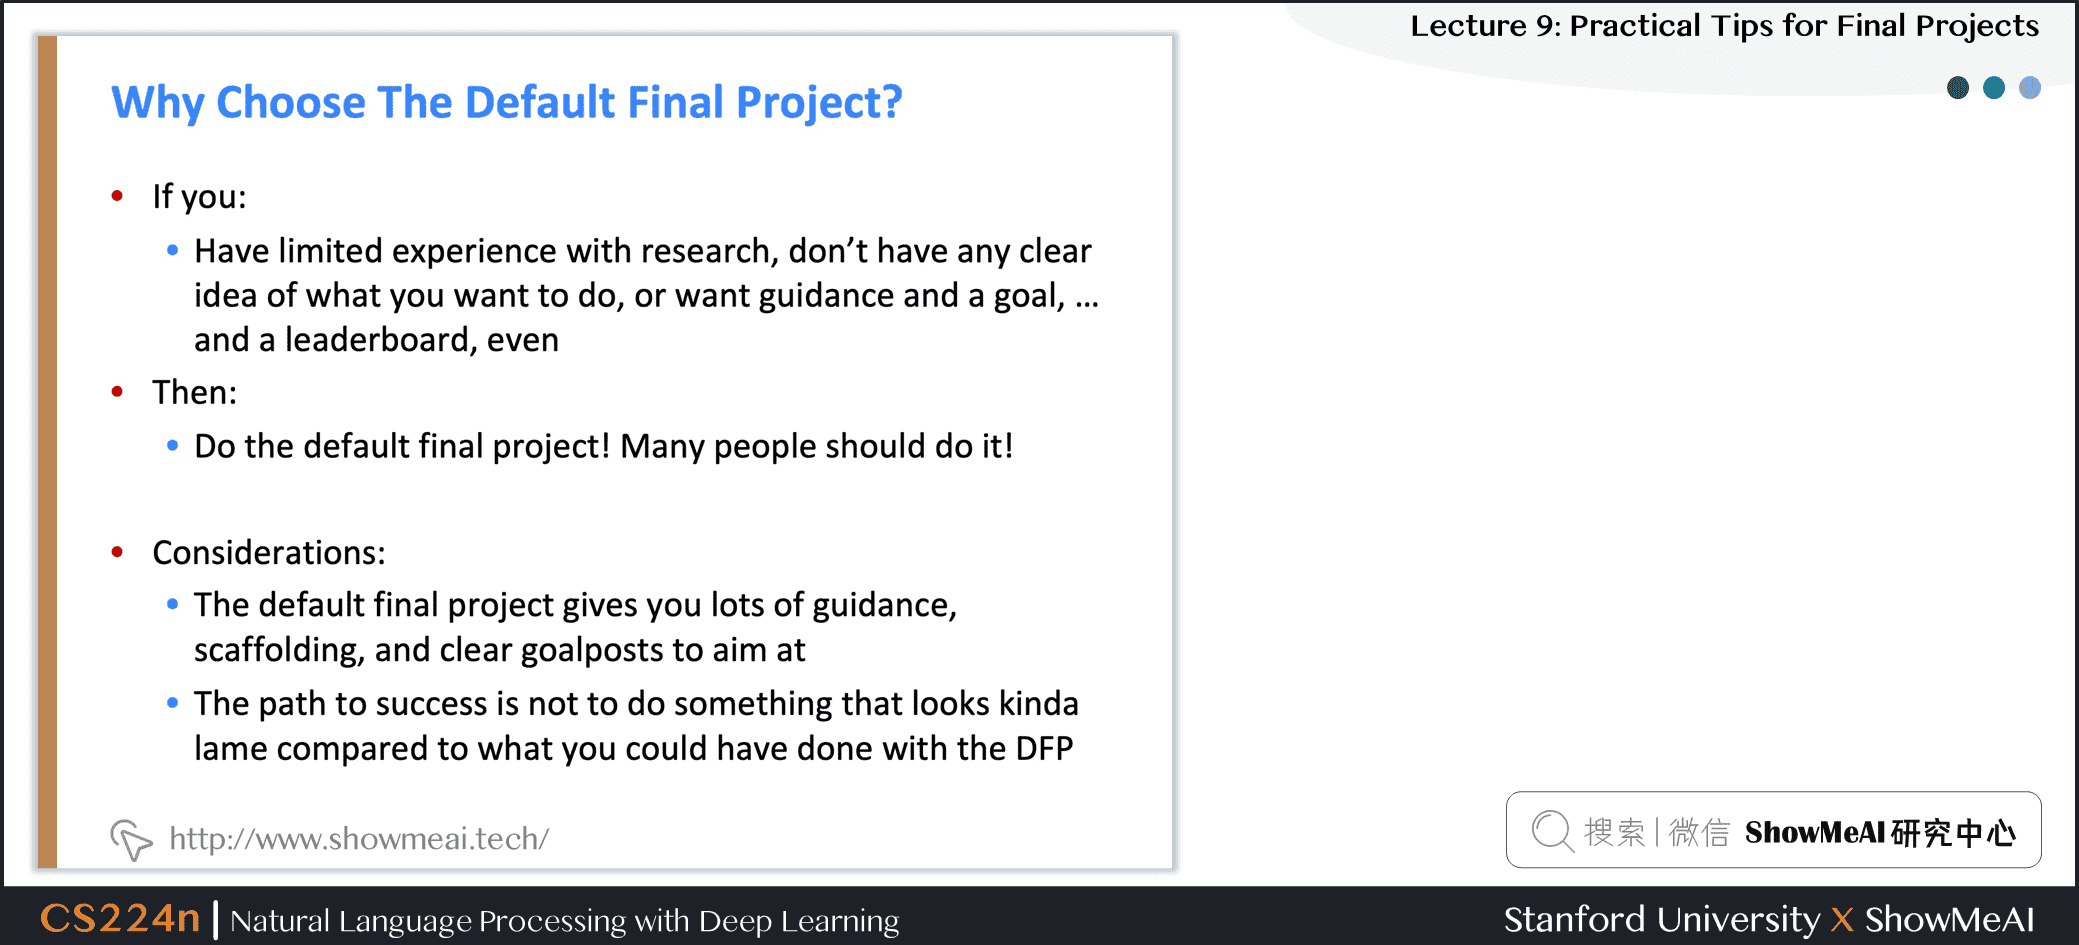 Why Choose The Default Final Project?